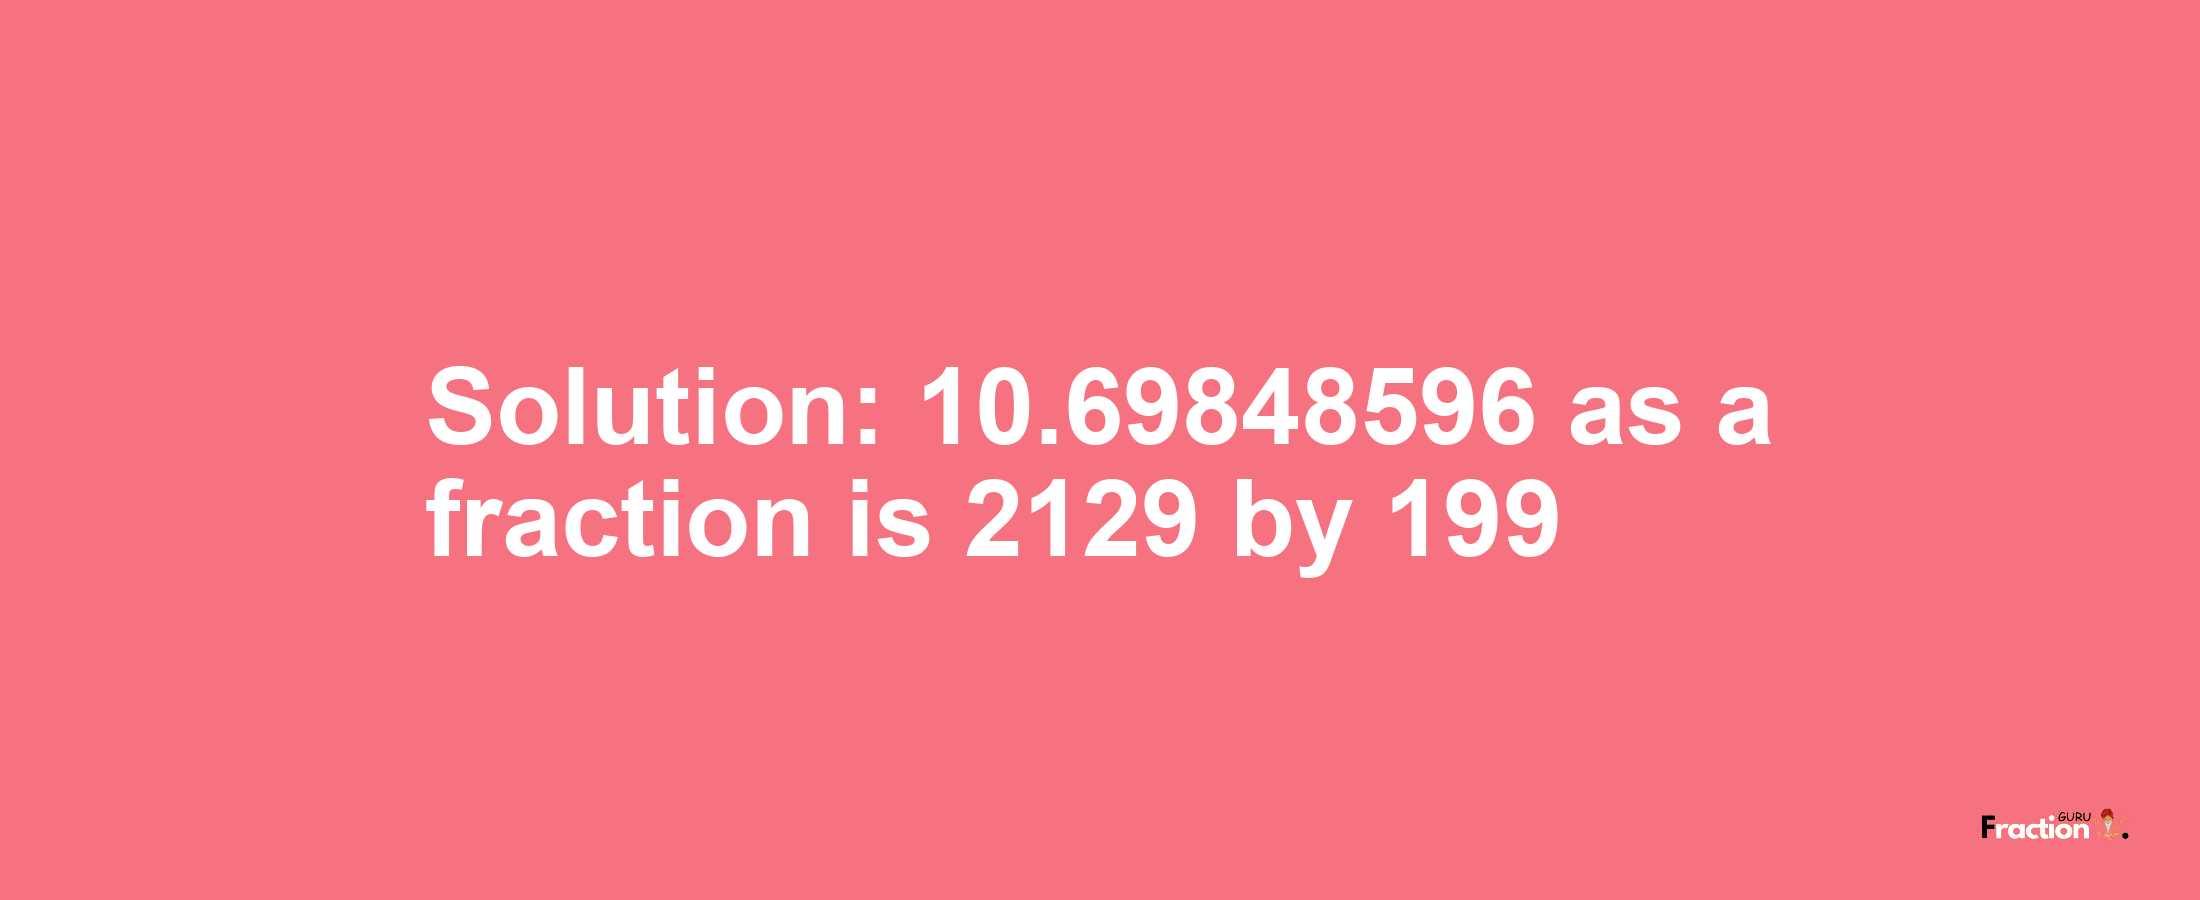 Solution:10.69848596 as a fraction is 2129/199